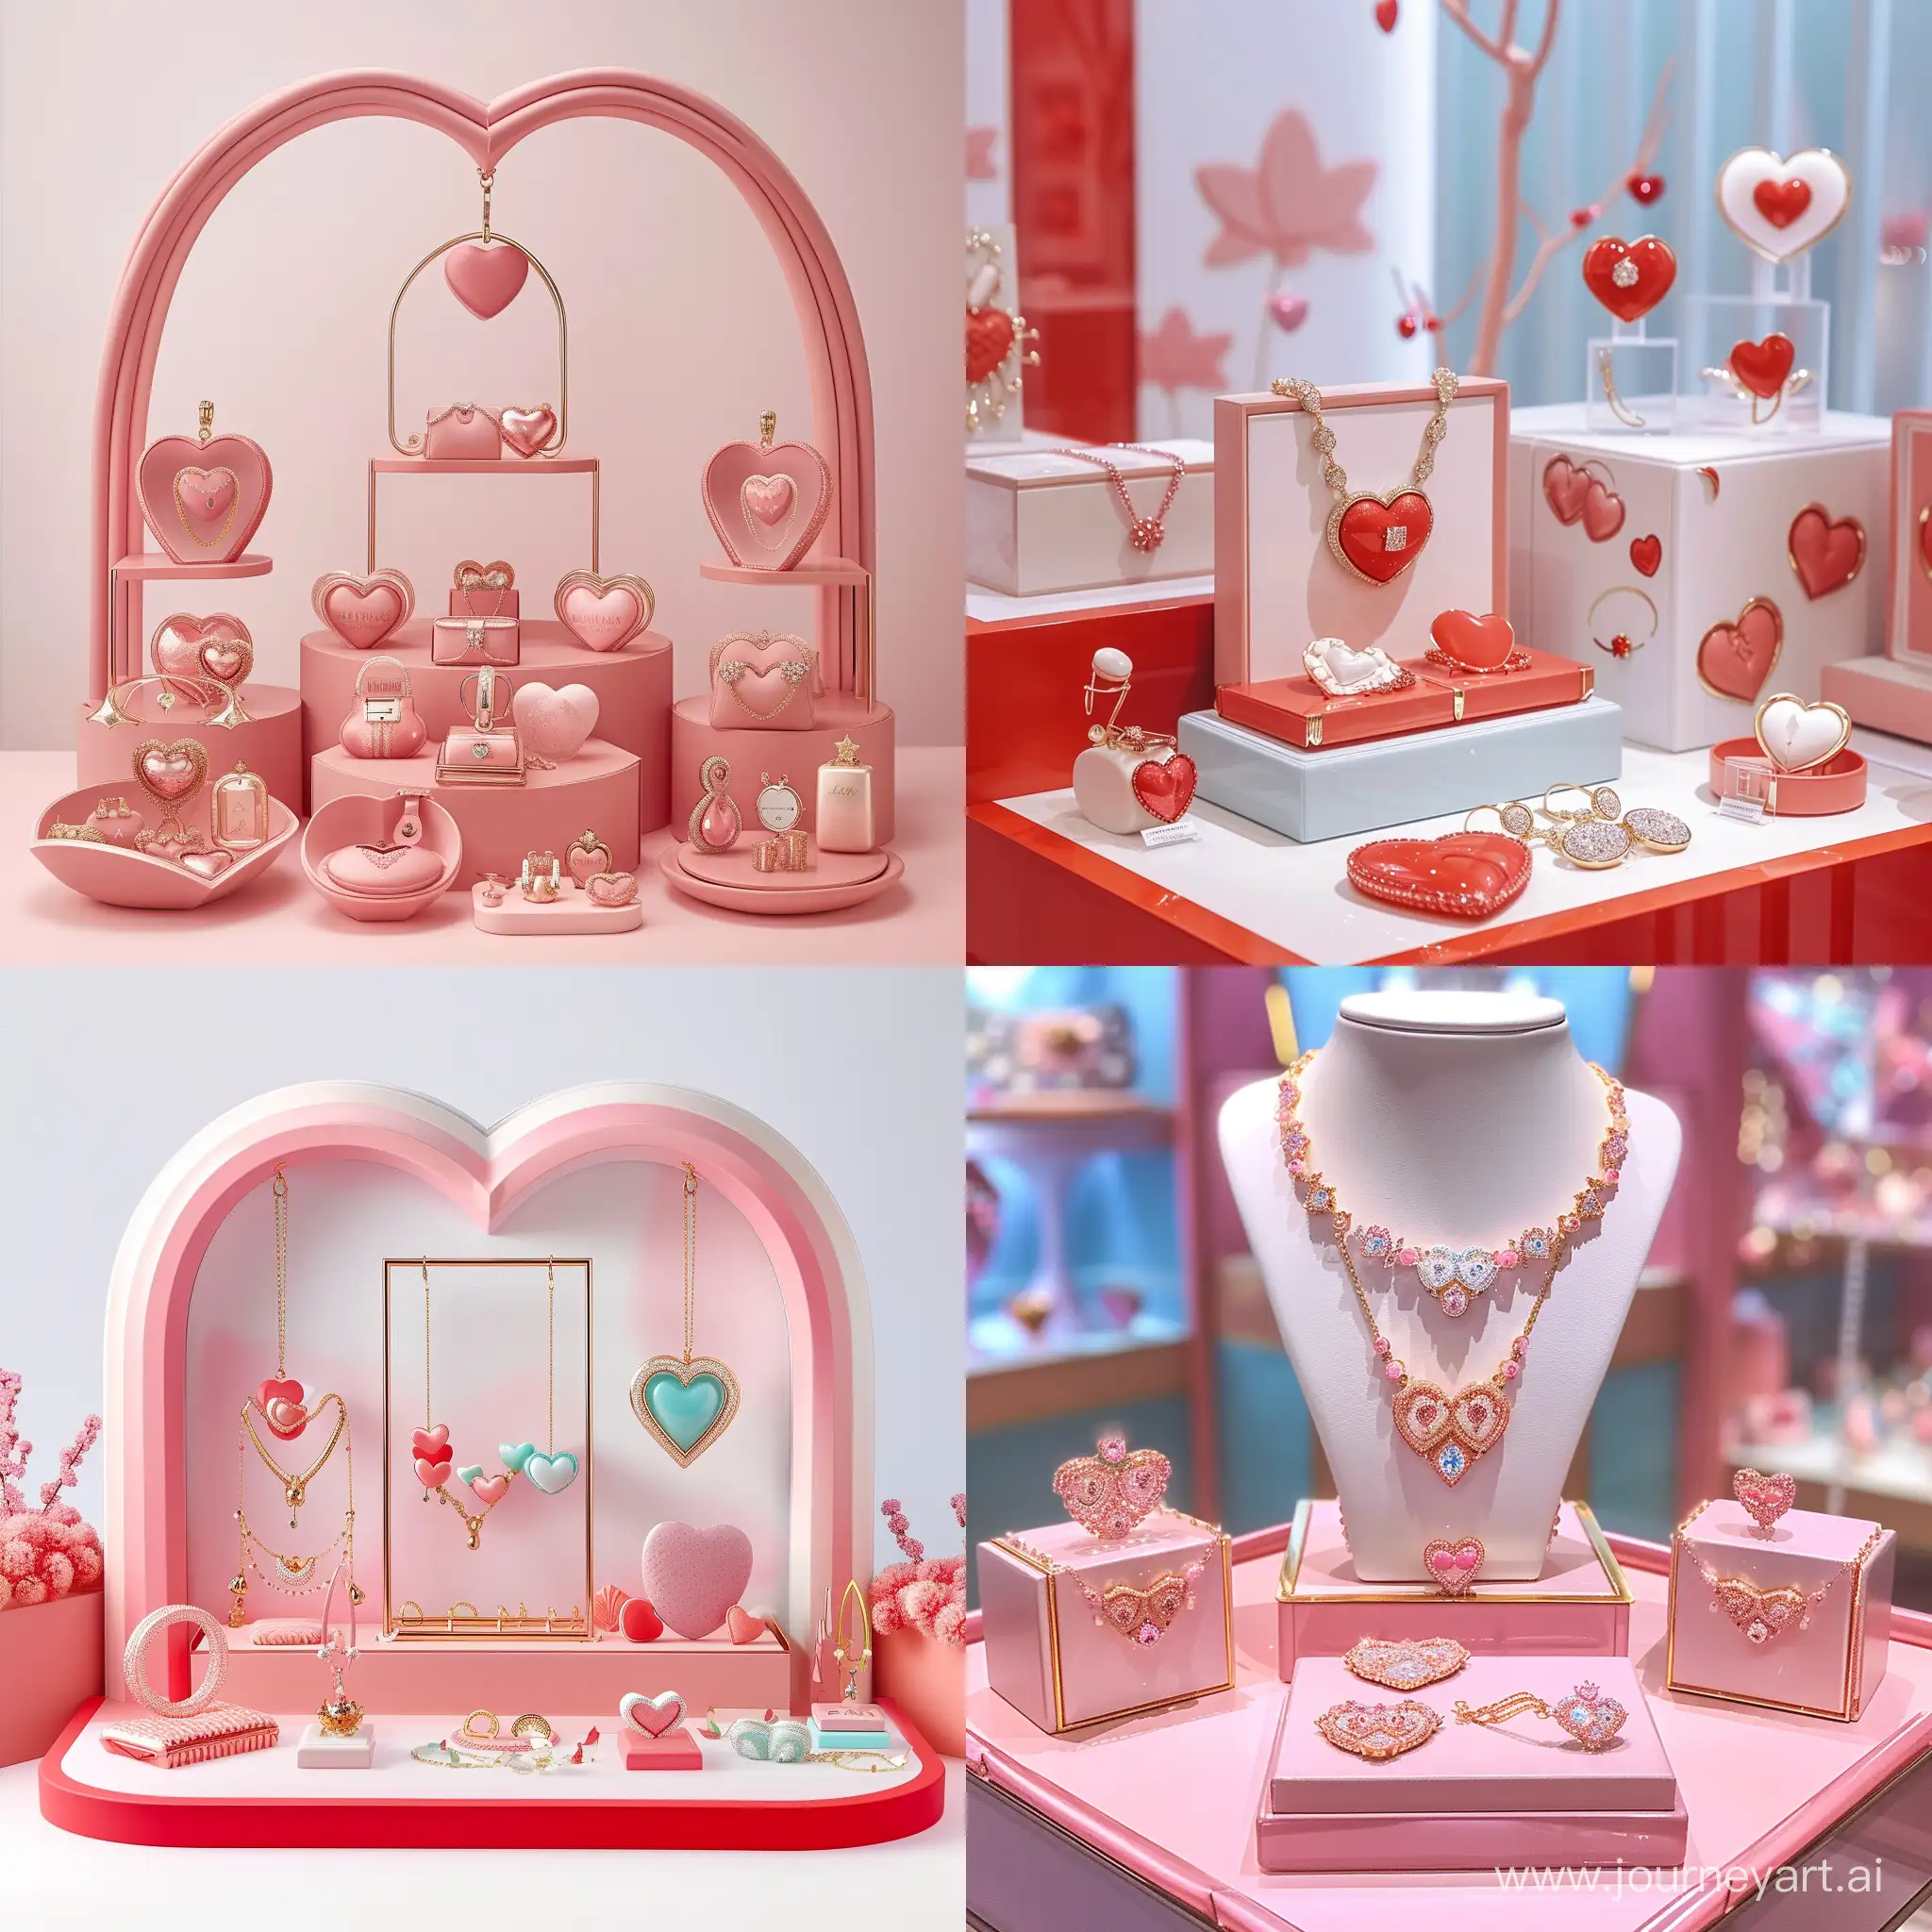 a pop up of a accessory collection for valentine's day. the pop up is a collaboration by two brand blumarine and pandora.